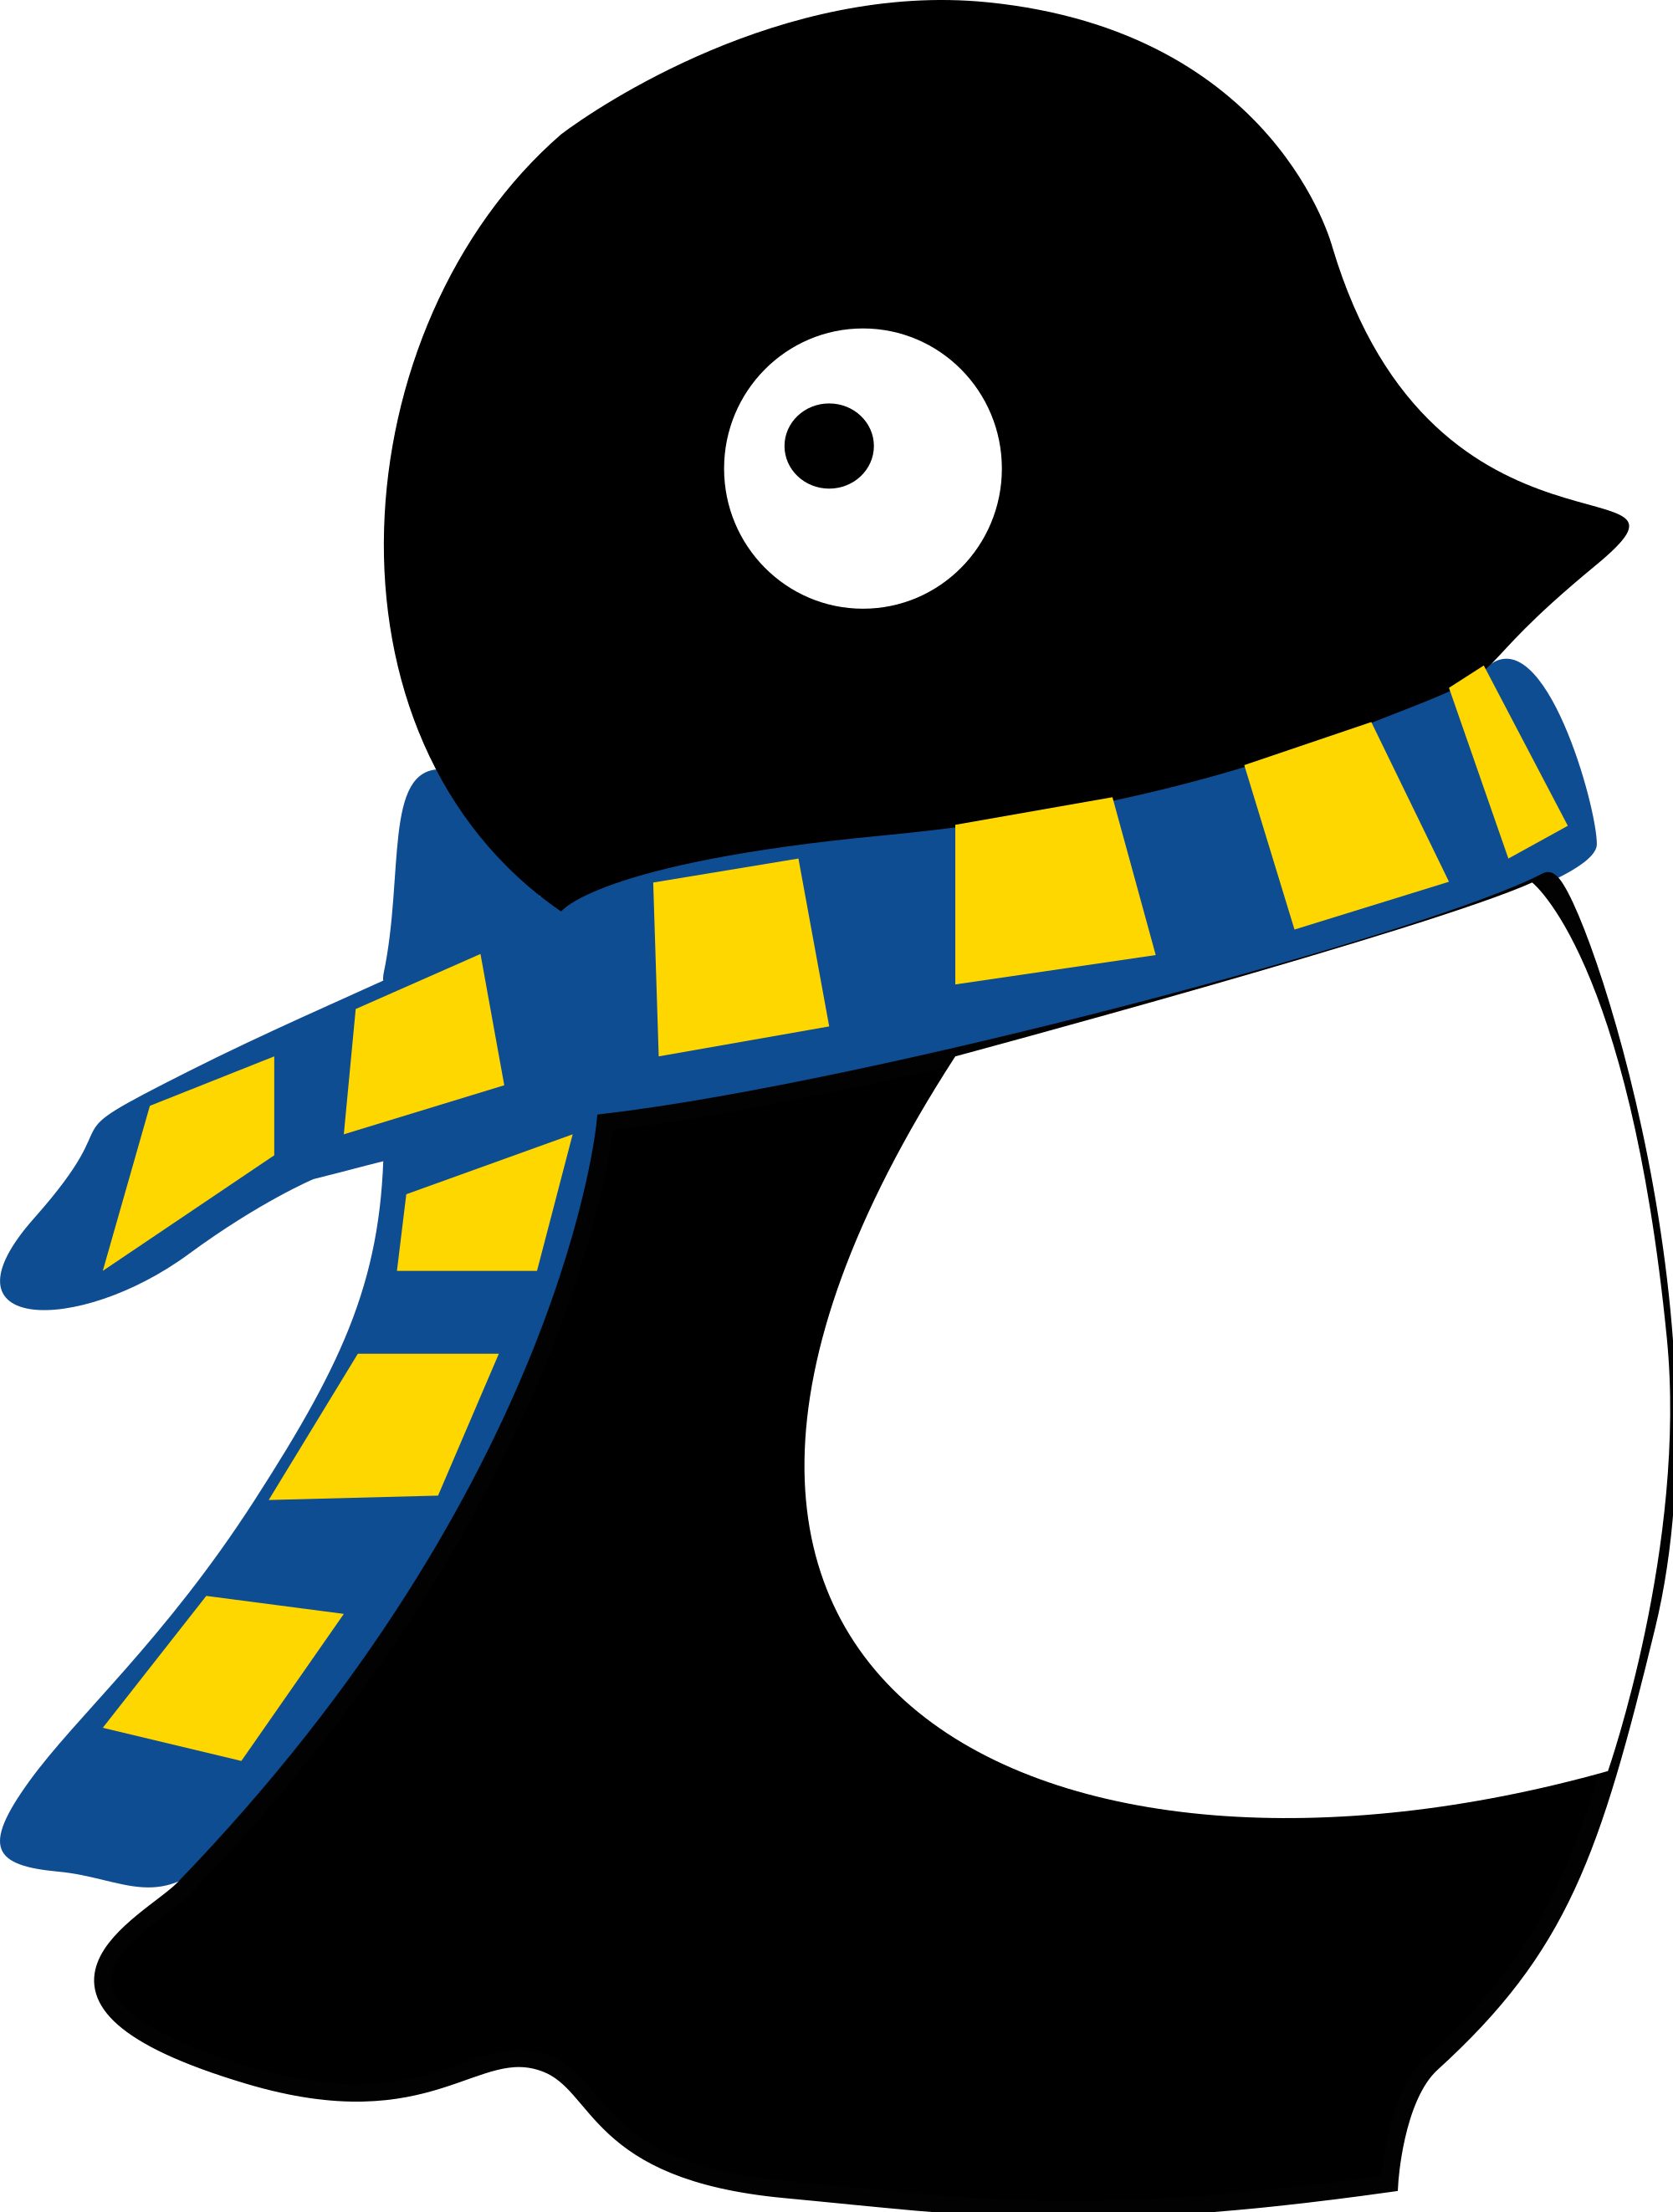 The Ocf Penguin And Logo/mascot Since 2012, Resembling - Wikipedia (2000x2645)